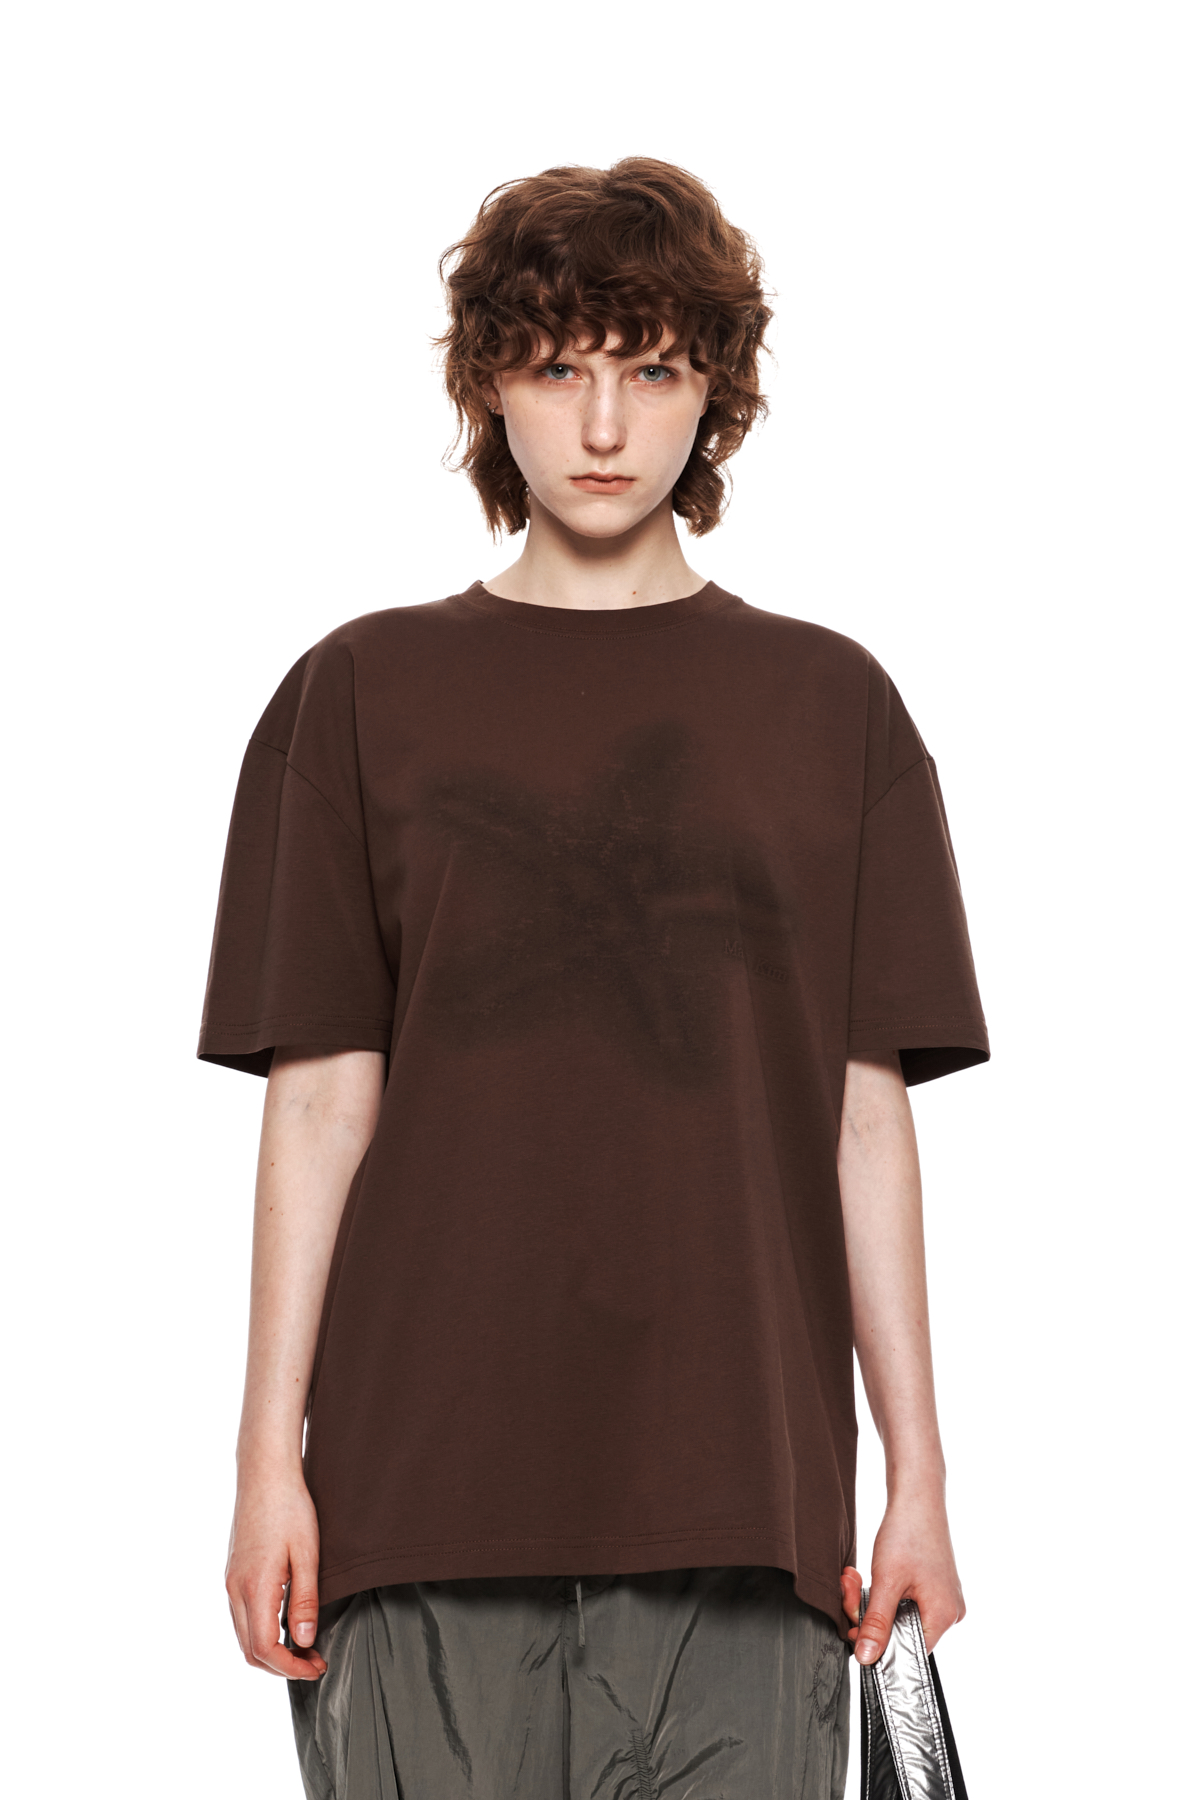 STARFISH GRAPHIC TOP IN BROWN